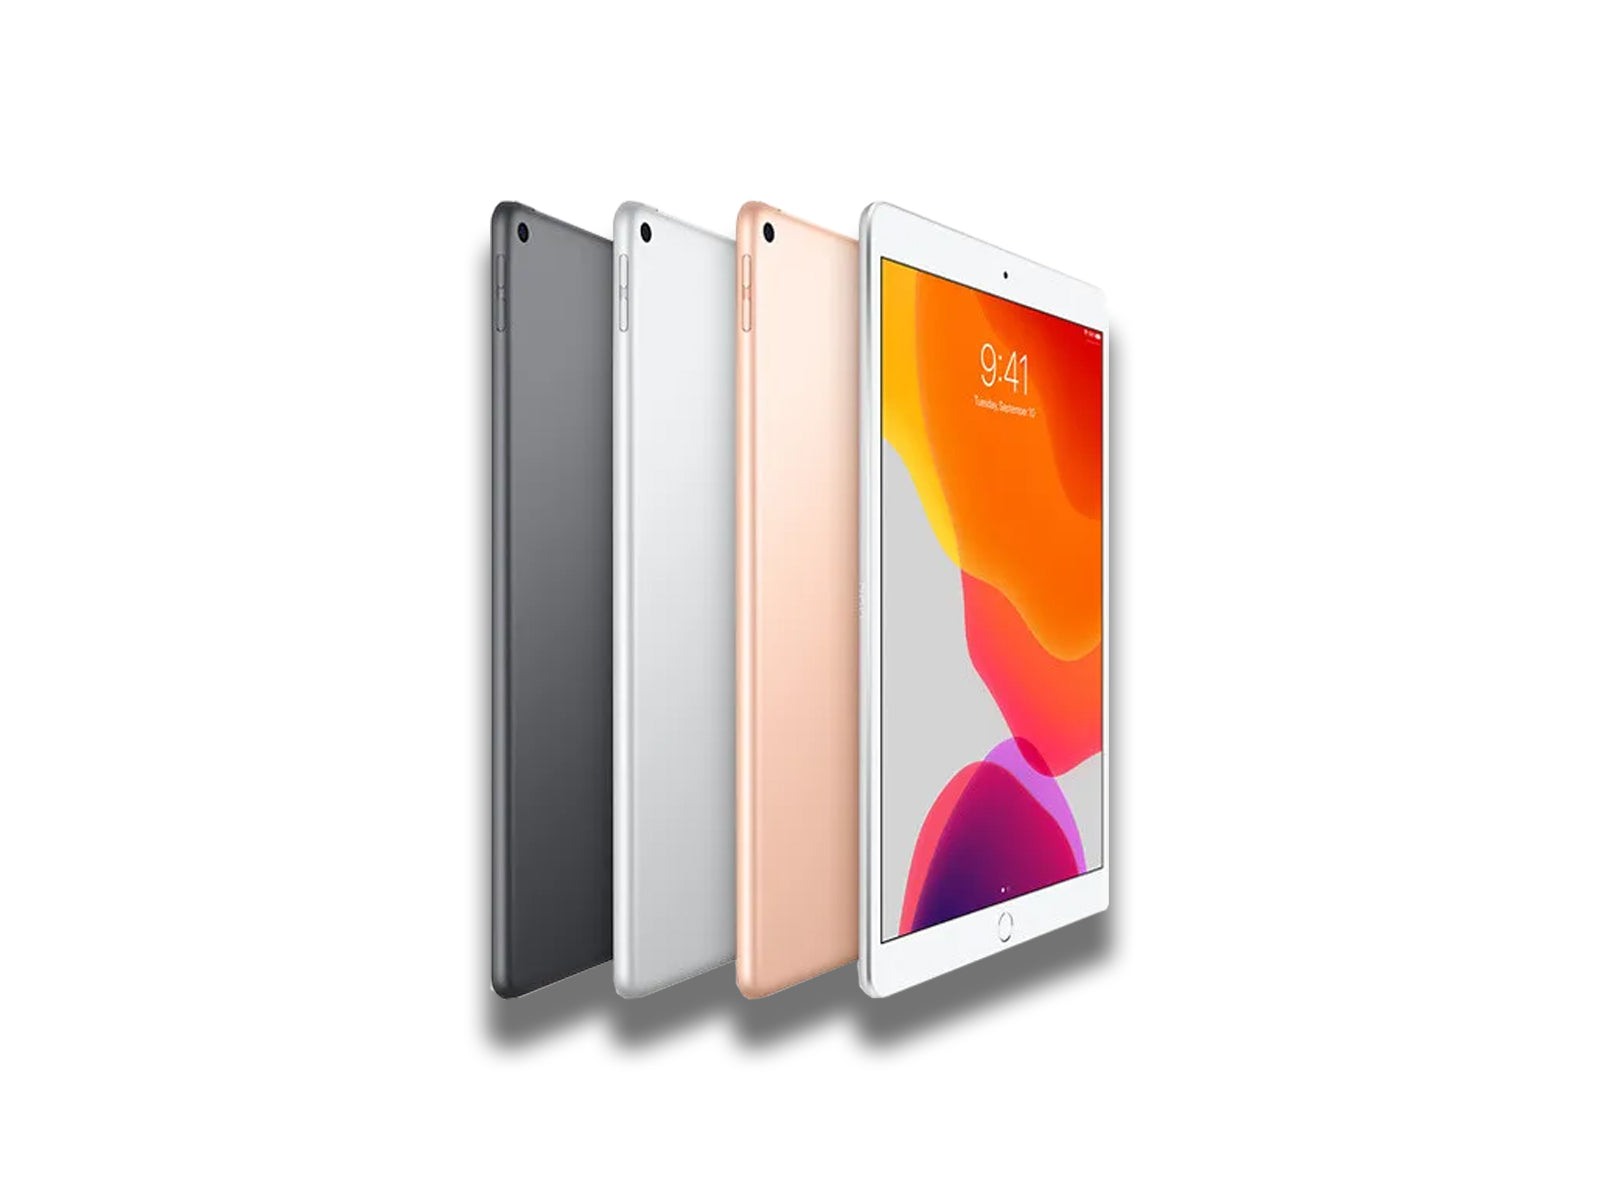 Apple iPad Air 3rd Gen In Space Grey, Silver, And Gold Side